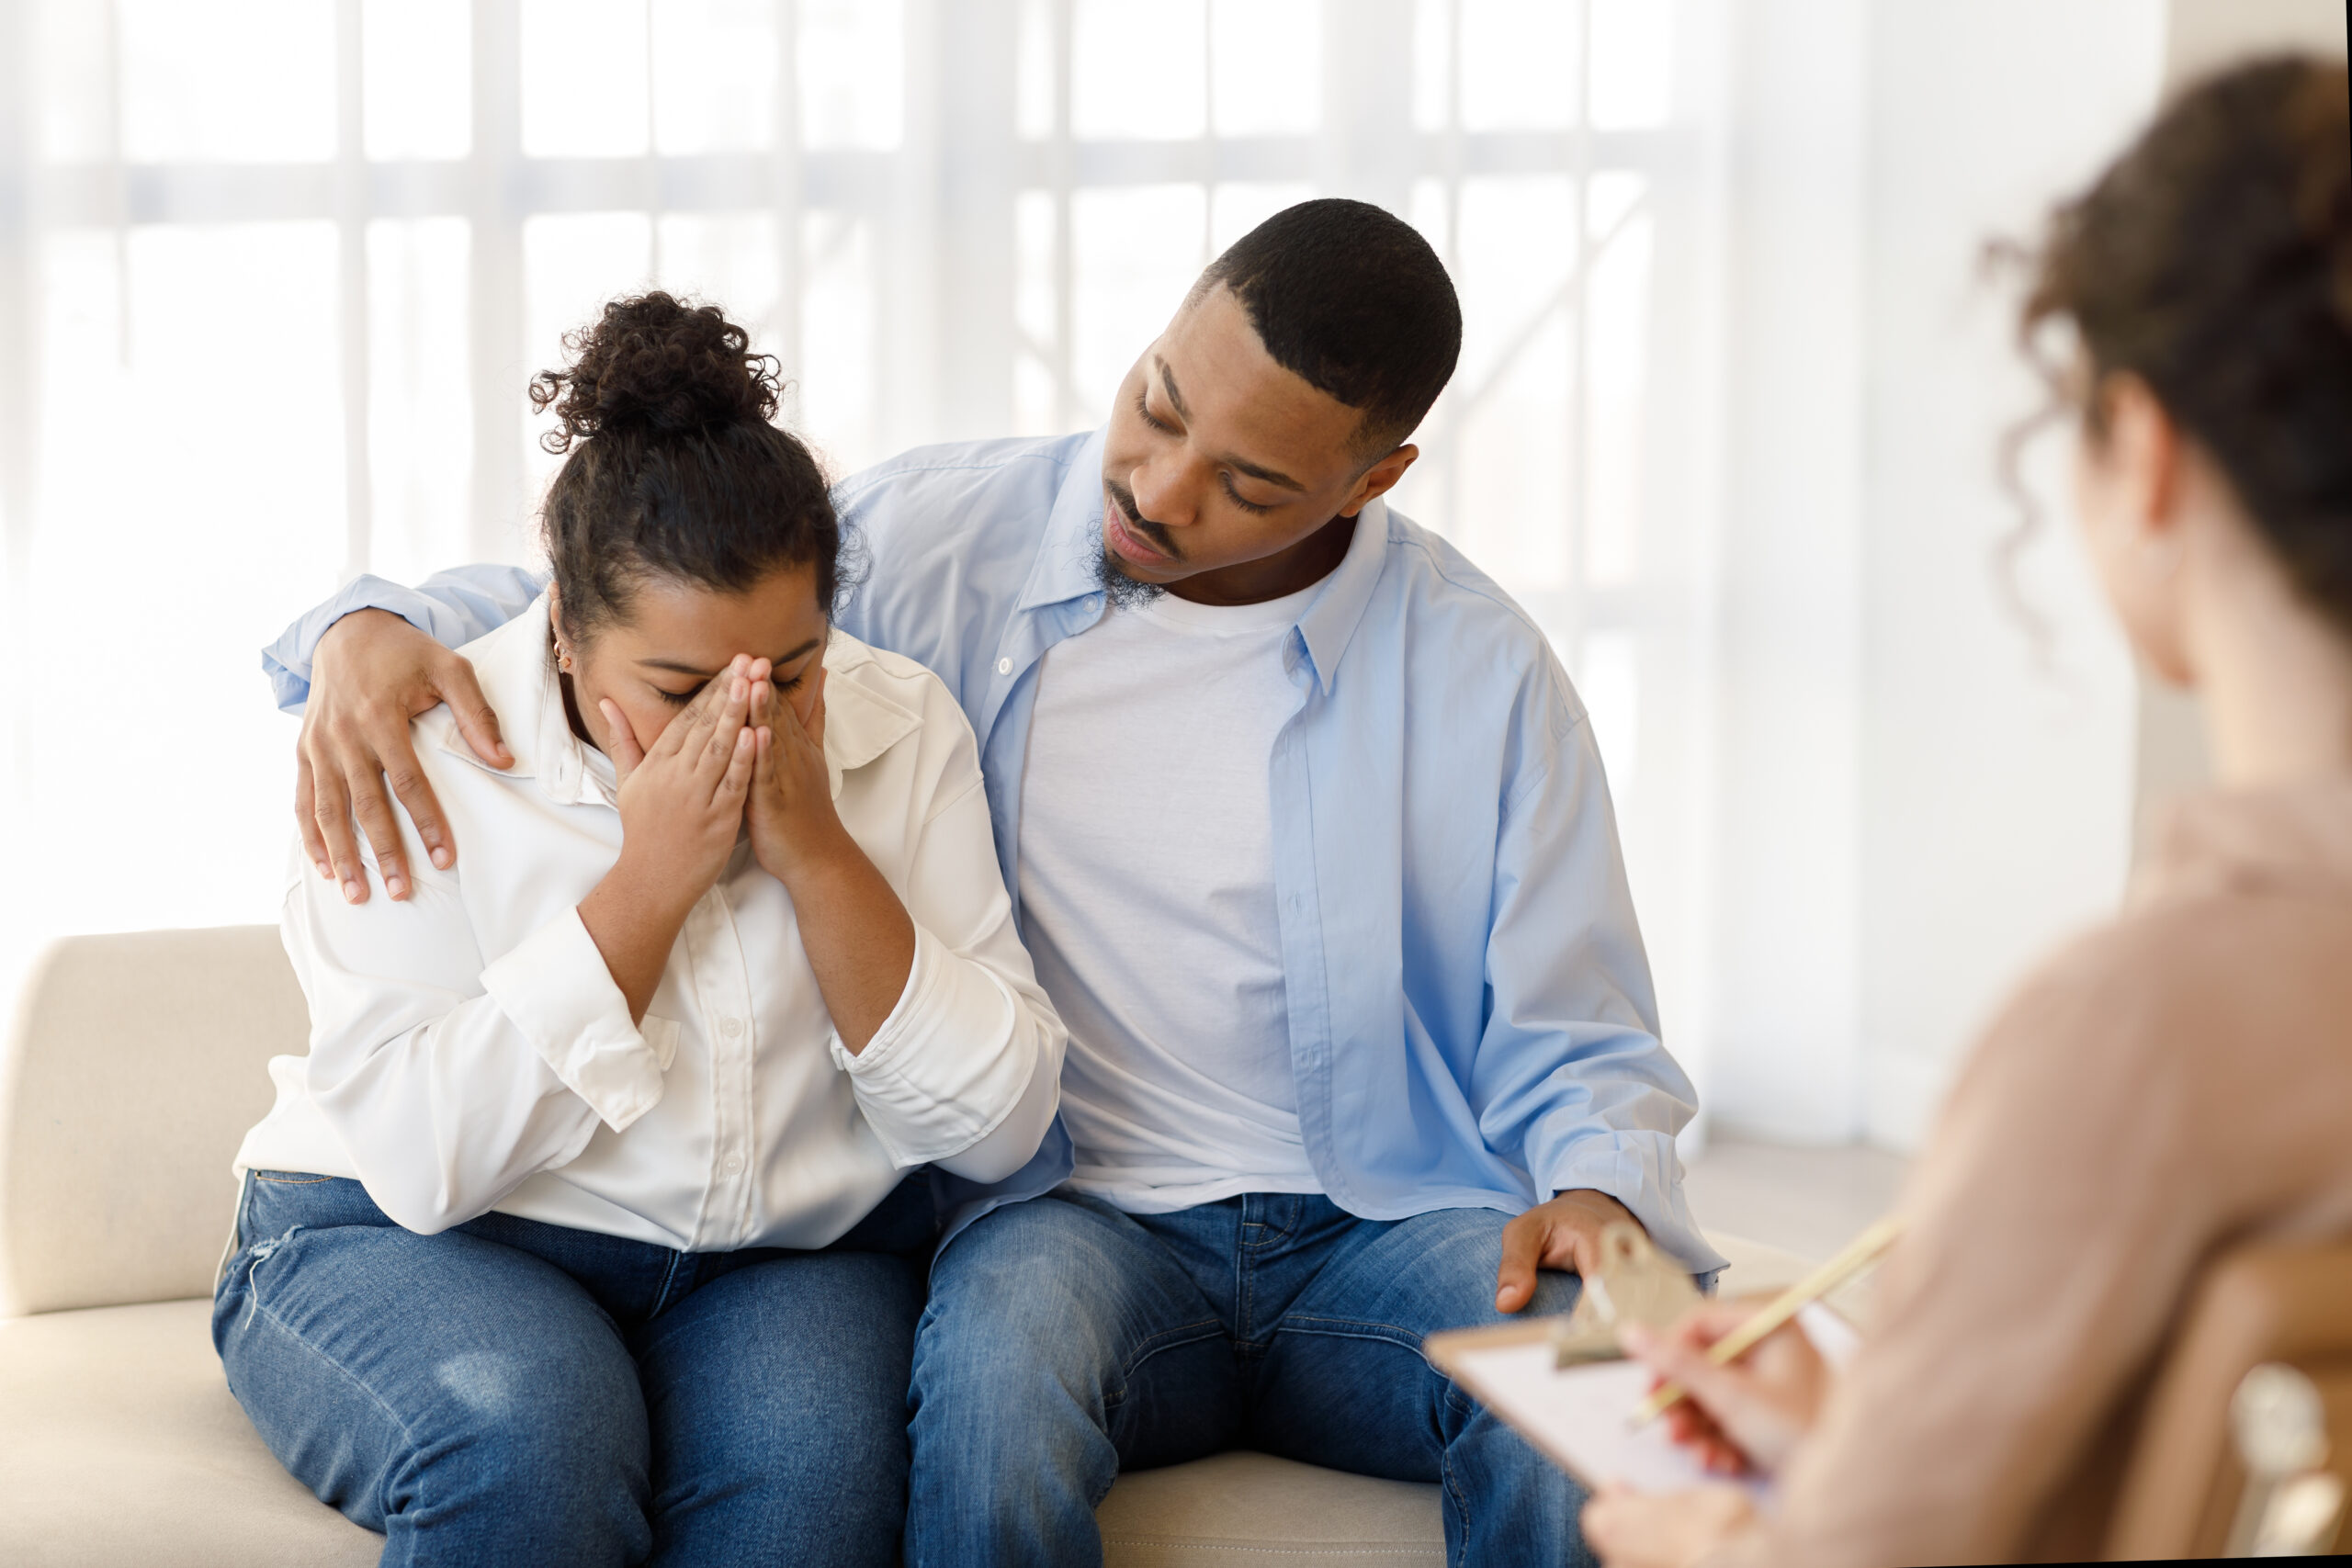 Loving attentive young black guy hugging comforting his crying spouse girlfriend suffering from depression while having family therapy with woman psychologist at counselor office